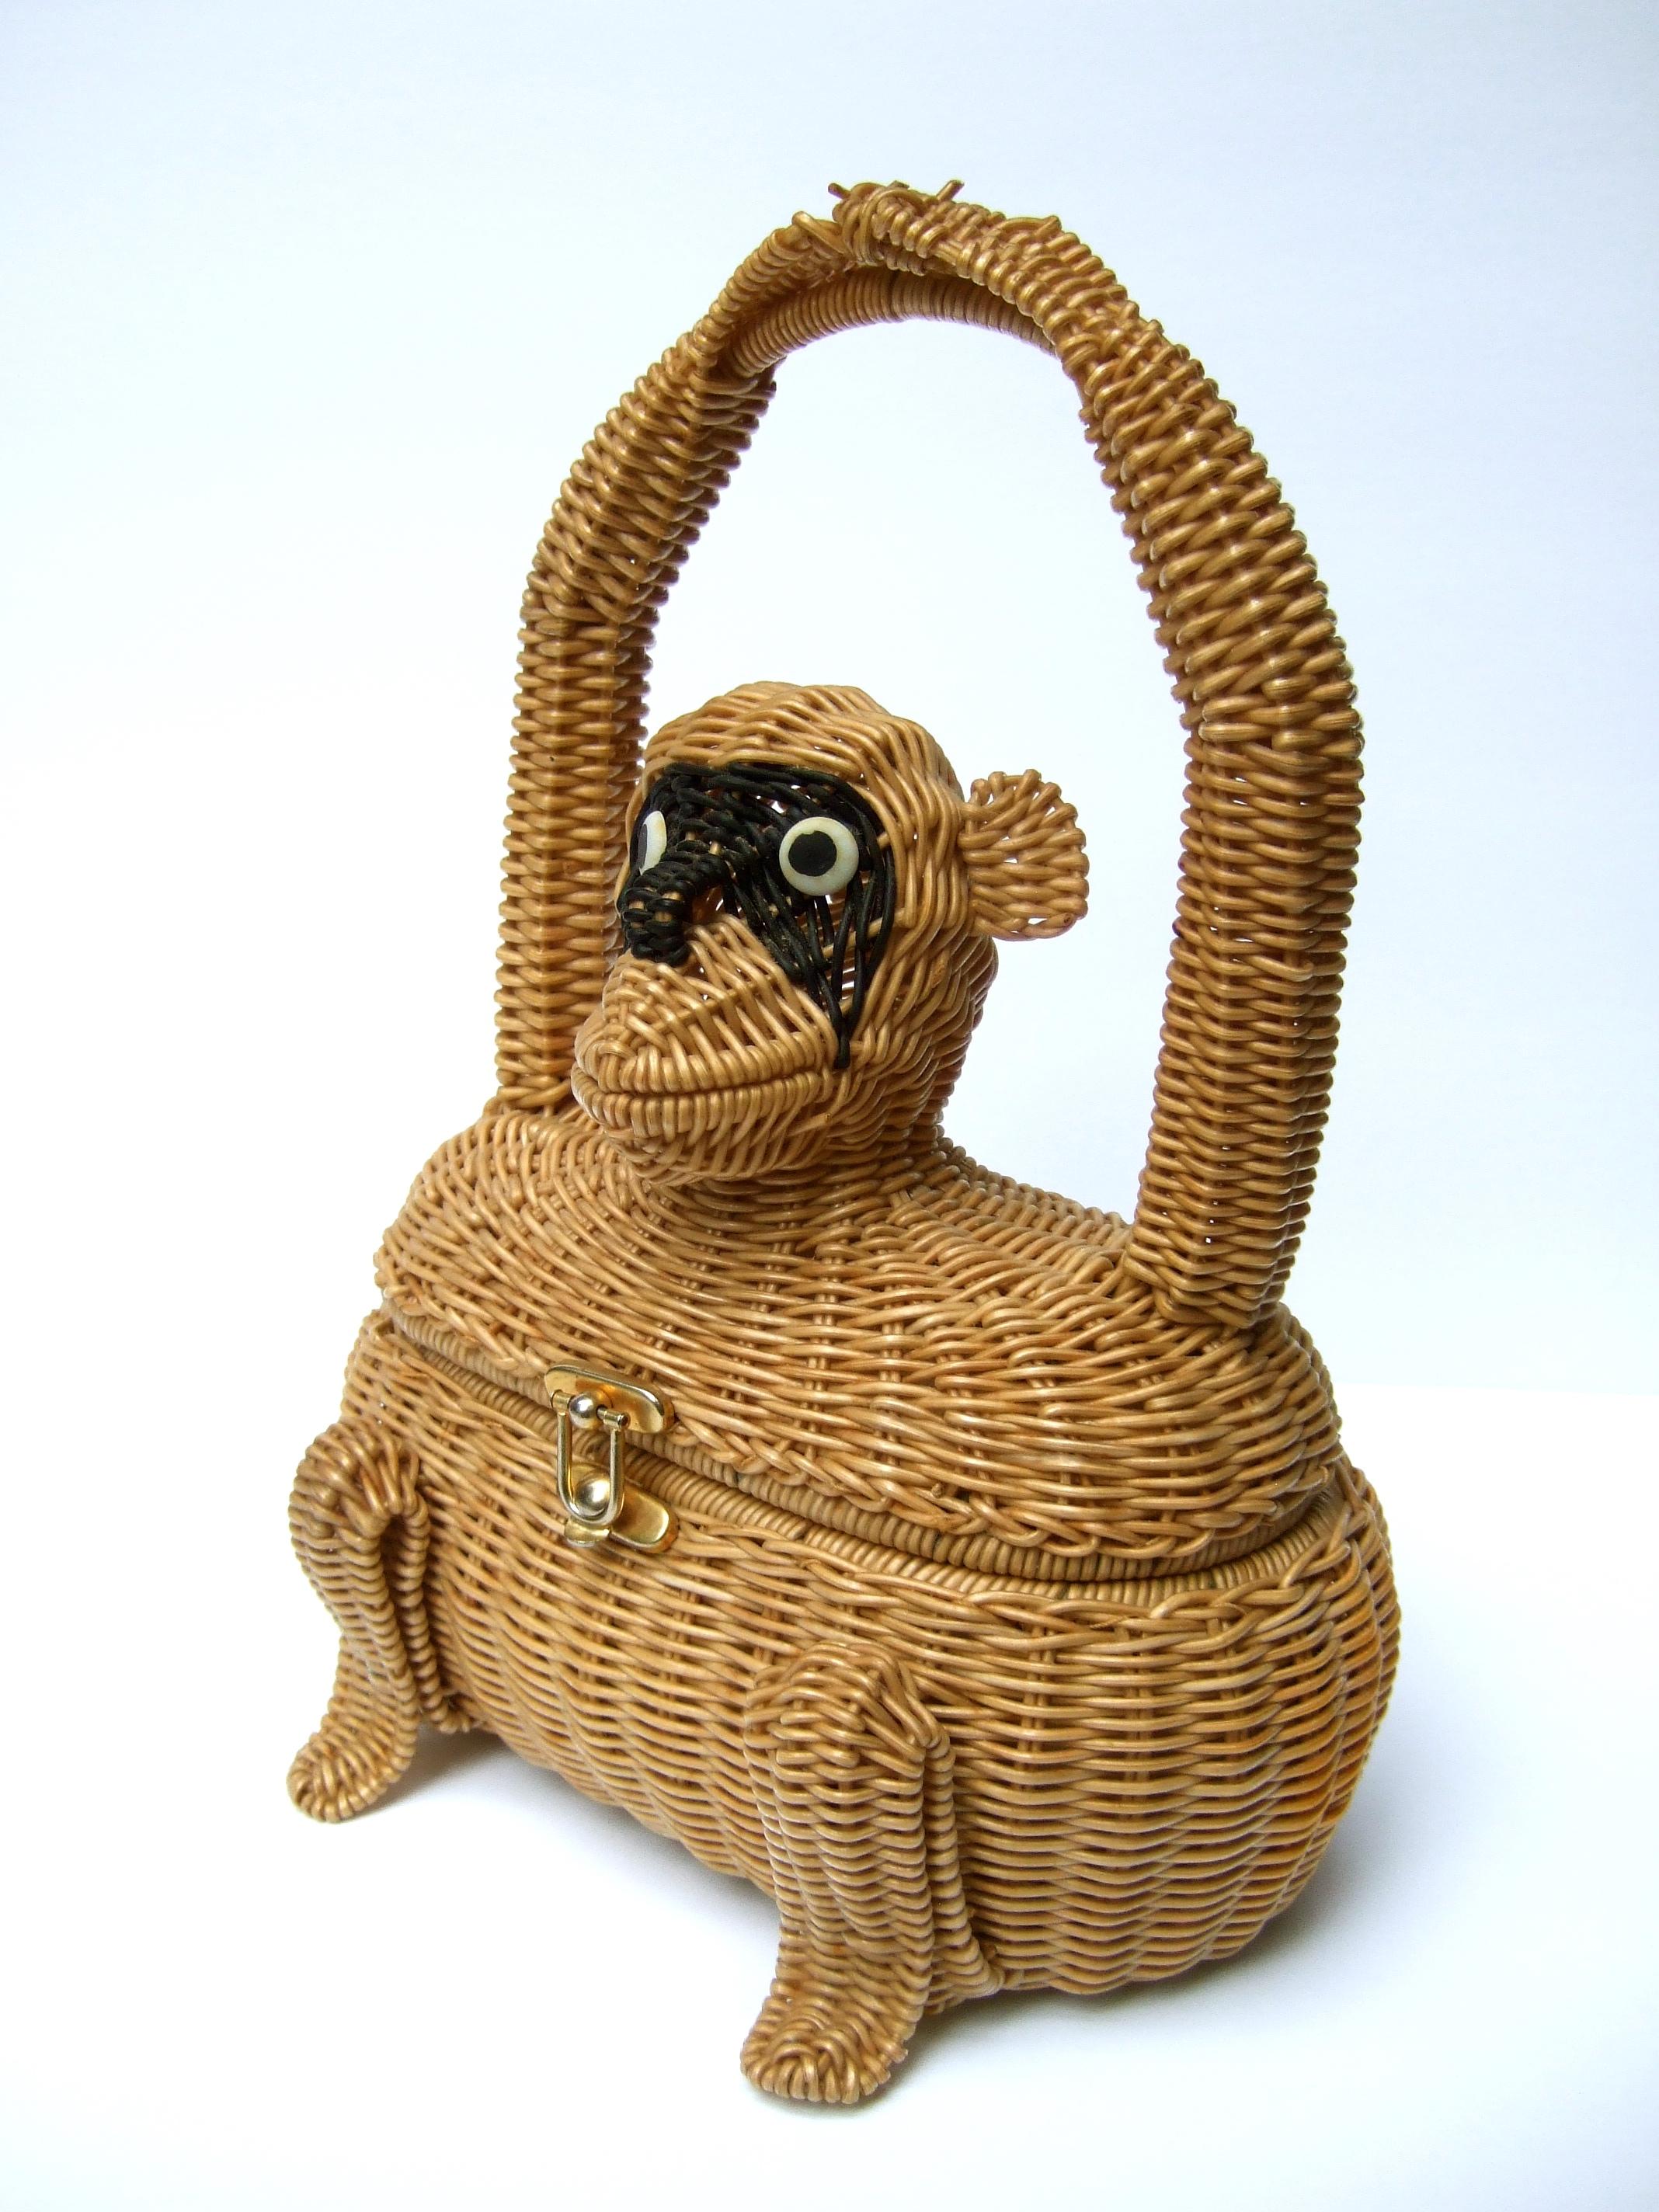 Whimsical Very Rare Wicker Monkey Handbag Designed by Marcus Brothers c 1960 For Sale 11